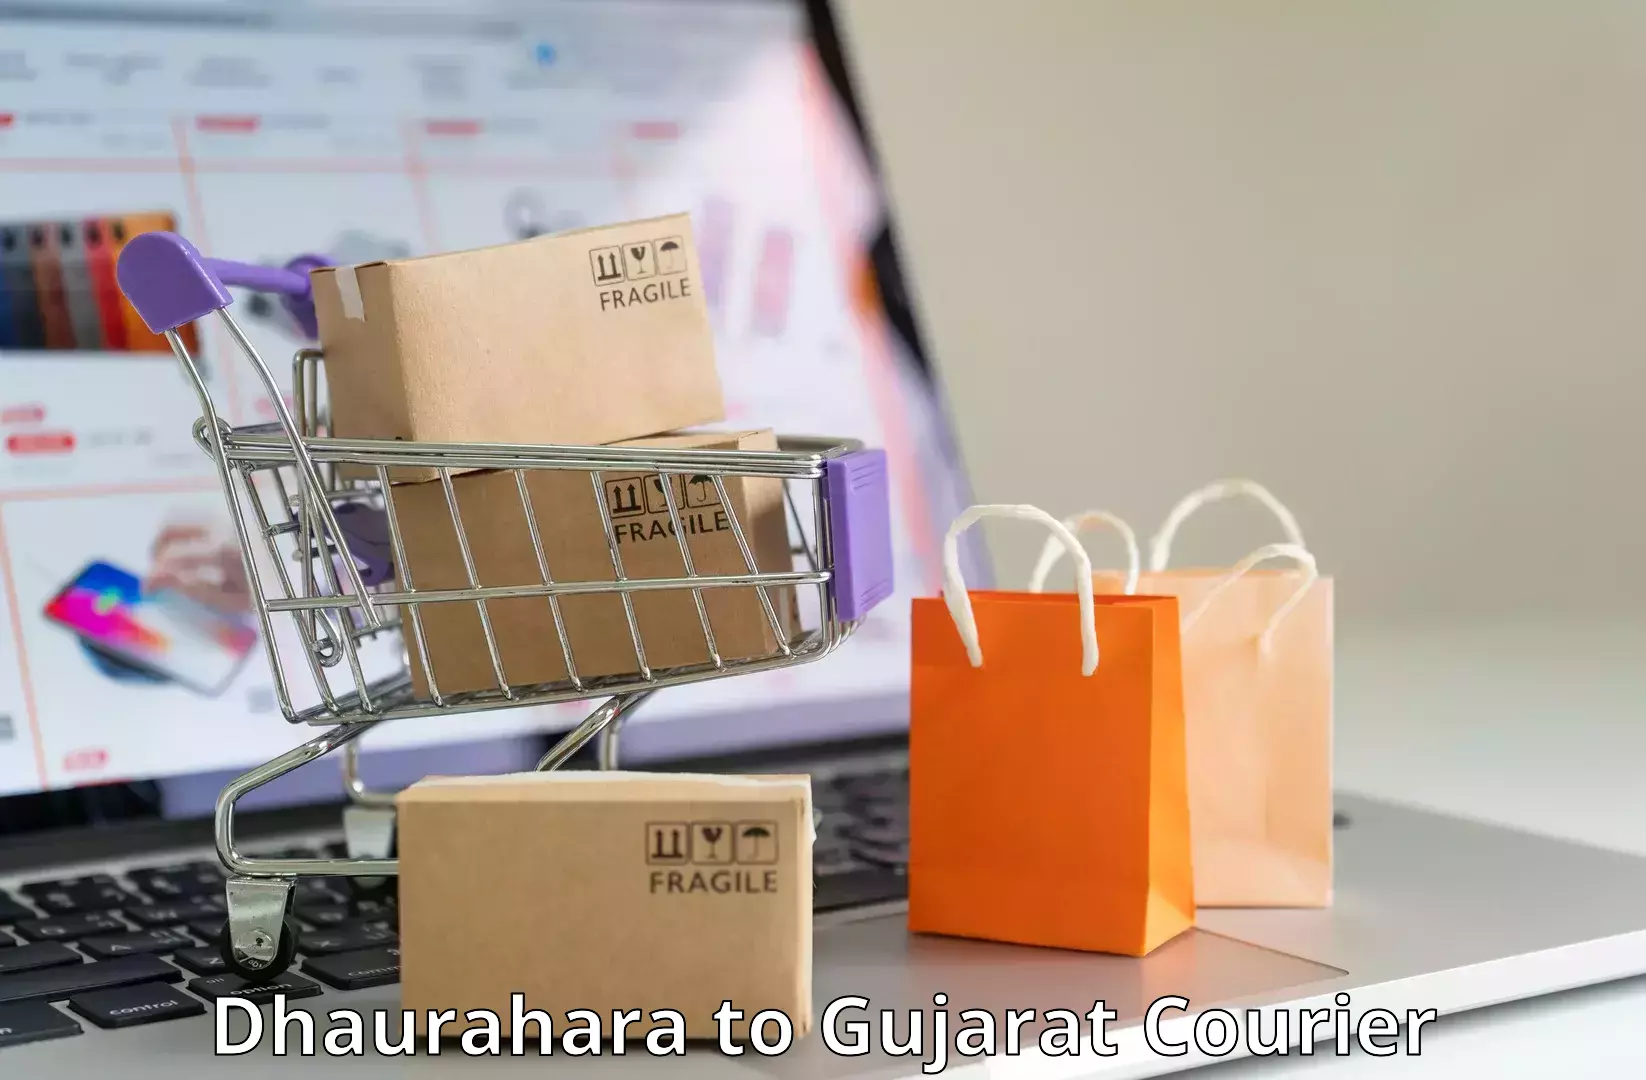 Express delivery solutions Dhaurahara to Dwarka